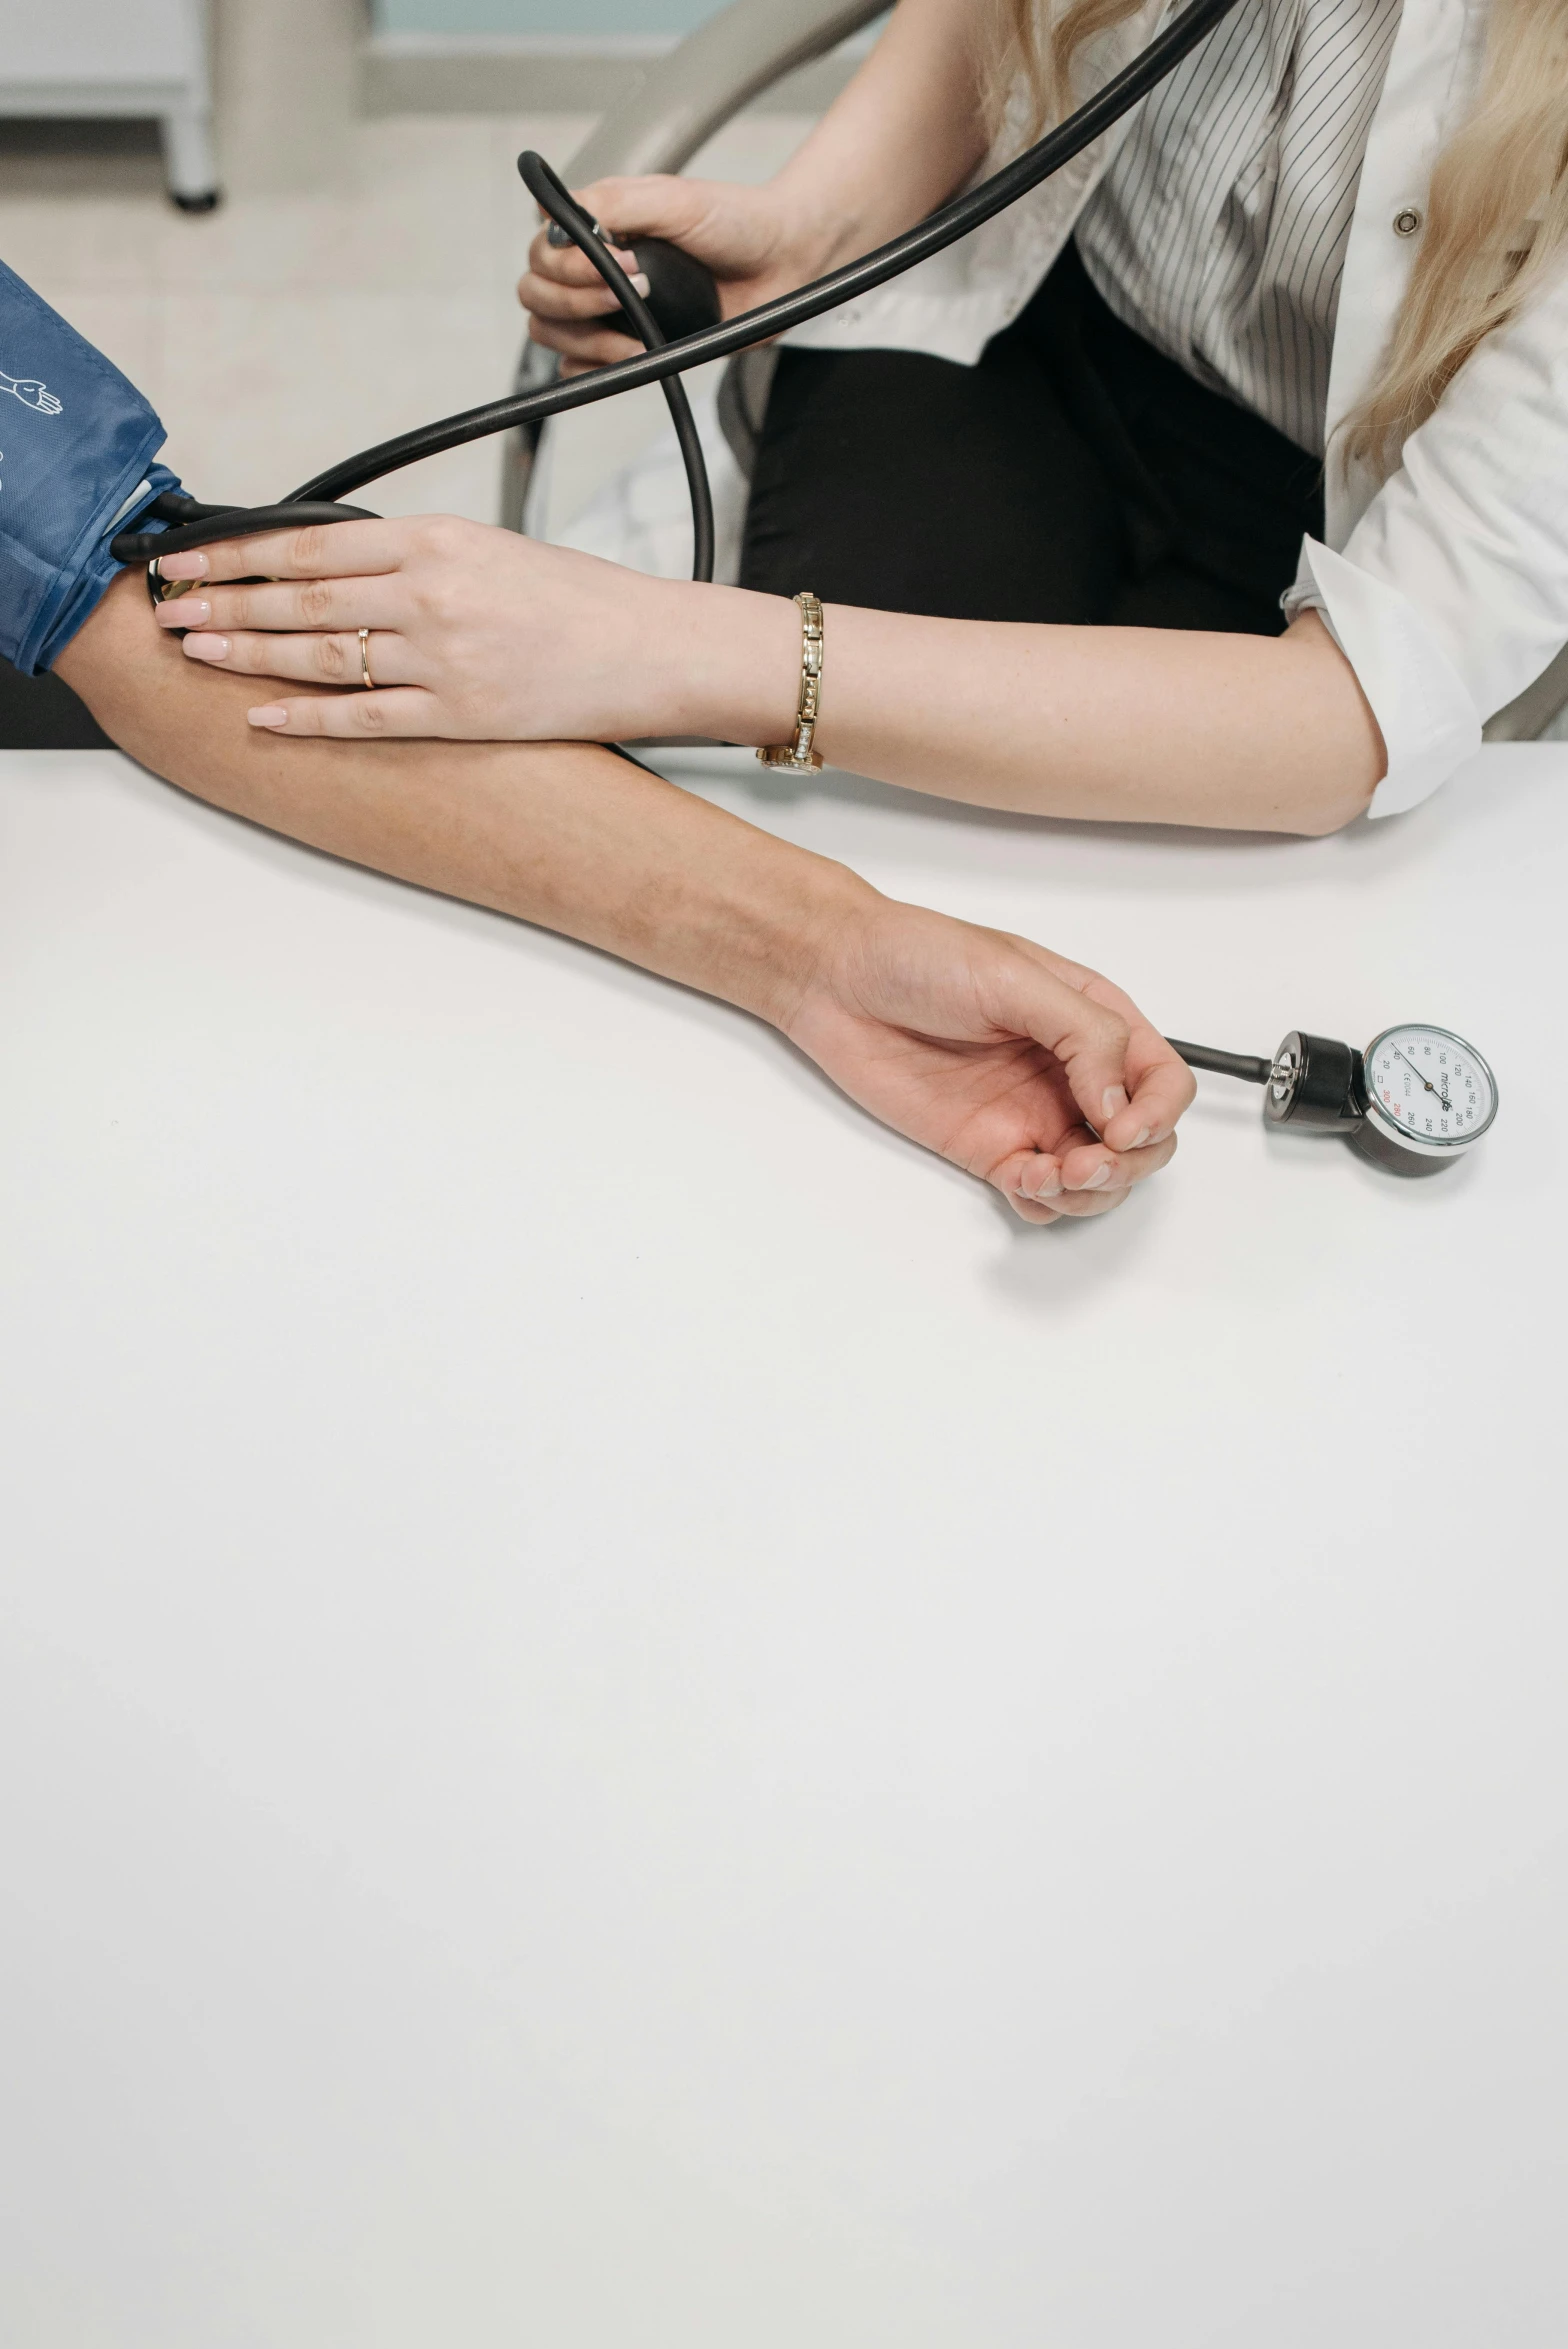 a female hand is hooked up to a  pressure needle